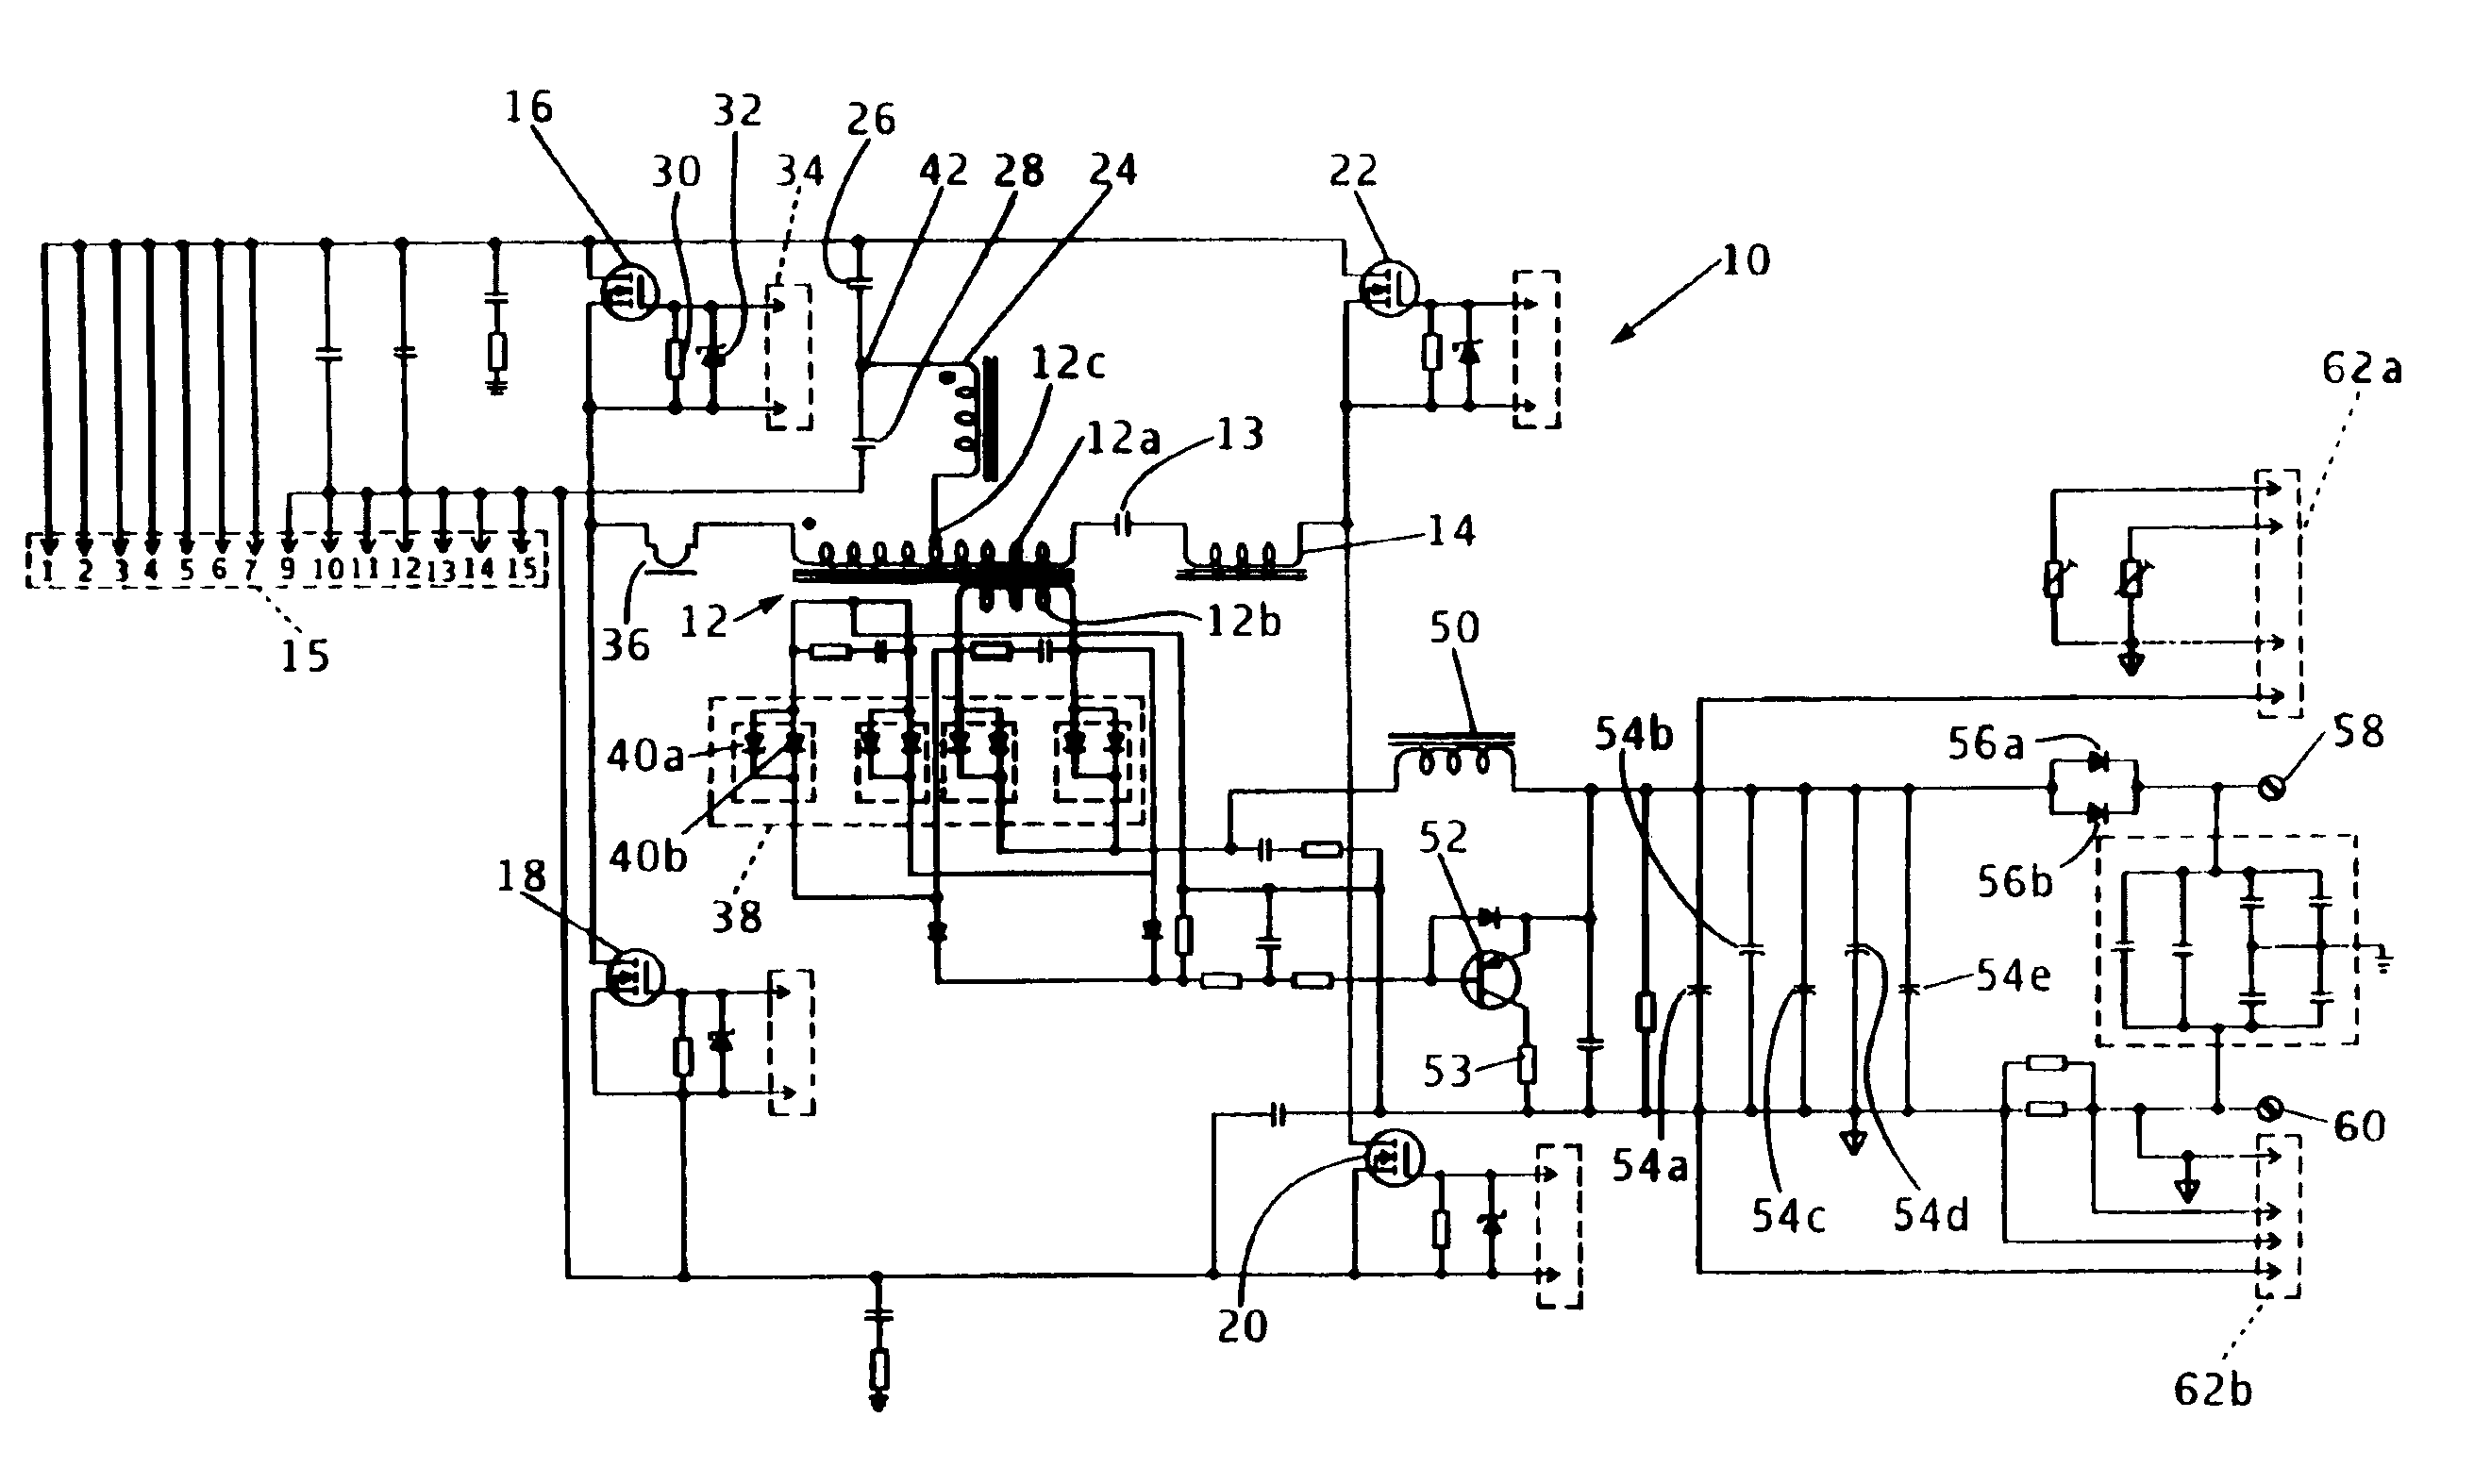 Zero-voltage-switched, full-bridge, phase-shifted DC-DC converter with improved light/no-load operation